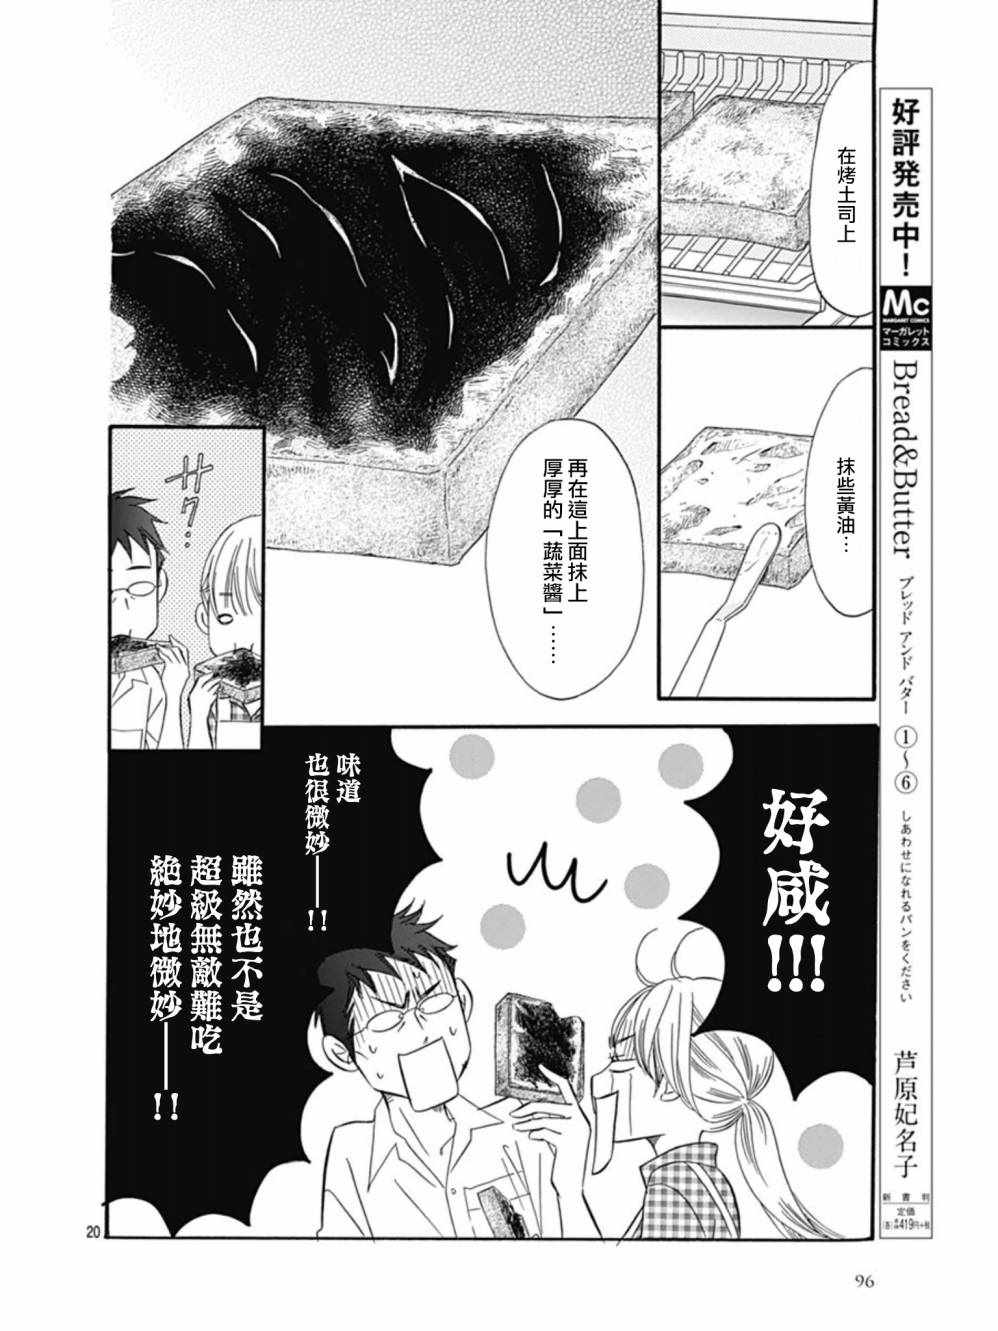 Bread&Butter - 第27話 - 6